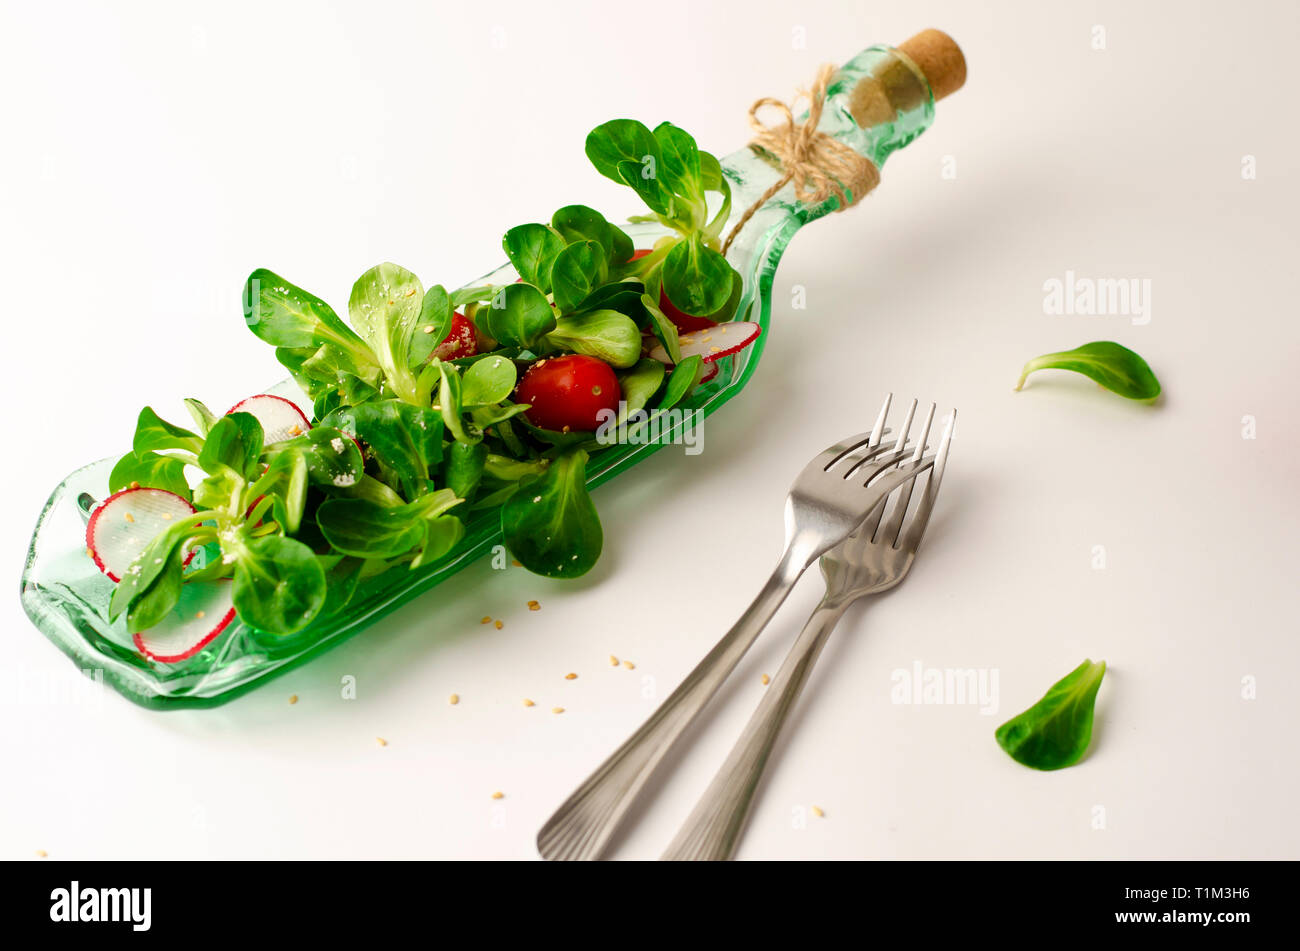 Healthy breakfast or lunch. Fresh vegetable salad of radish, tomatoes and corn salad or Valerianella locusta. Close up on white plate. Diet and vegeta Stock Photo